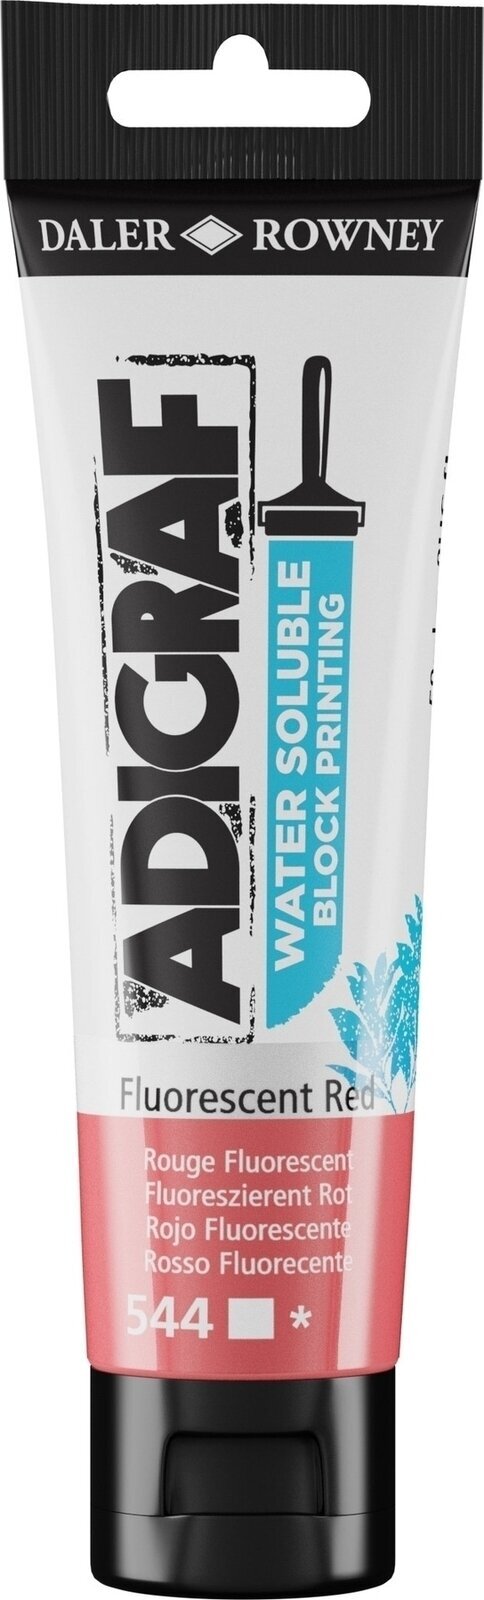 Farba na linoryt Daler Rowney Adigraf Block Printing Water Soluble Colour Farba na linoryt Fluorescent Red 59 ml